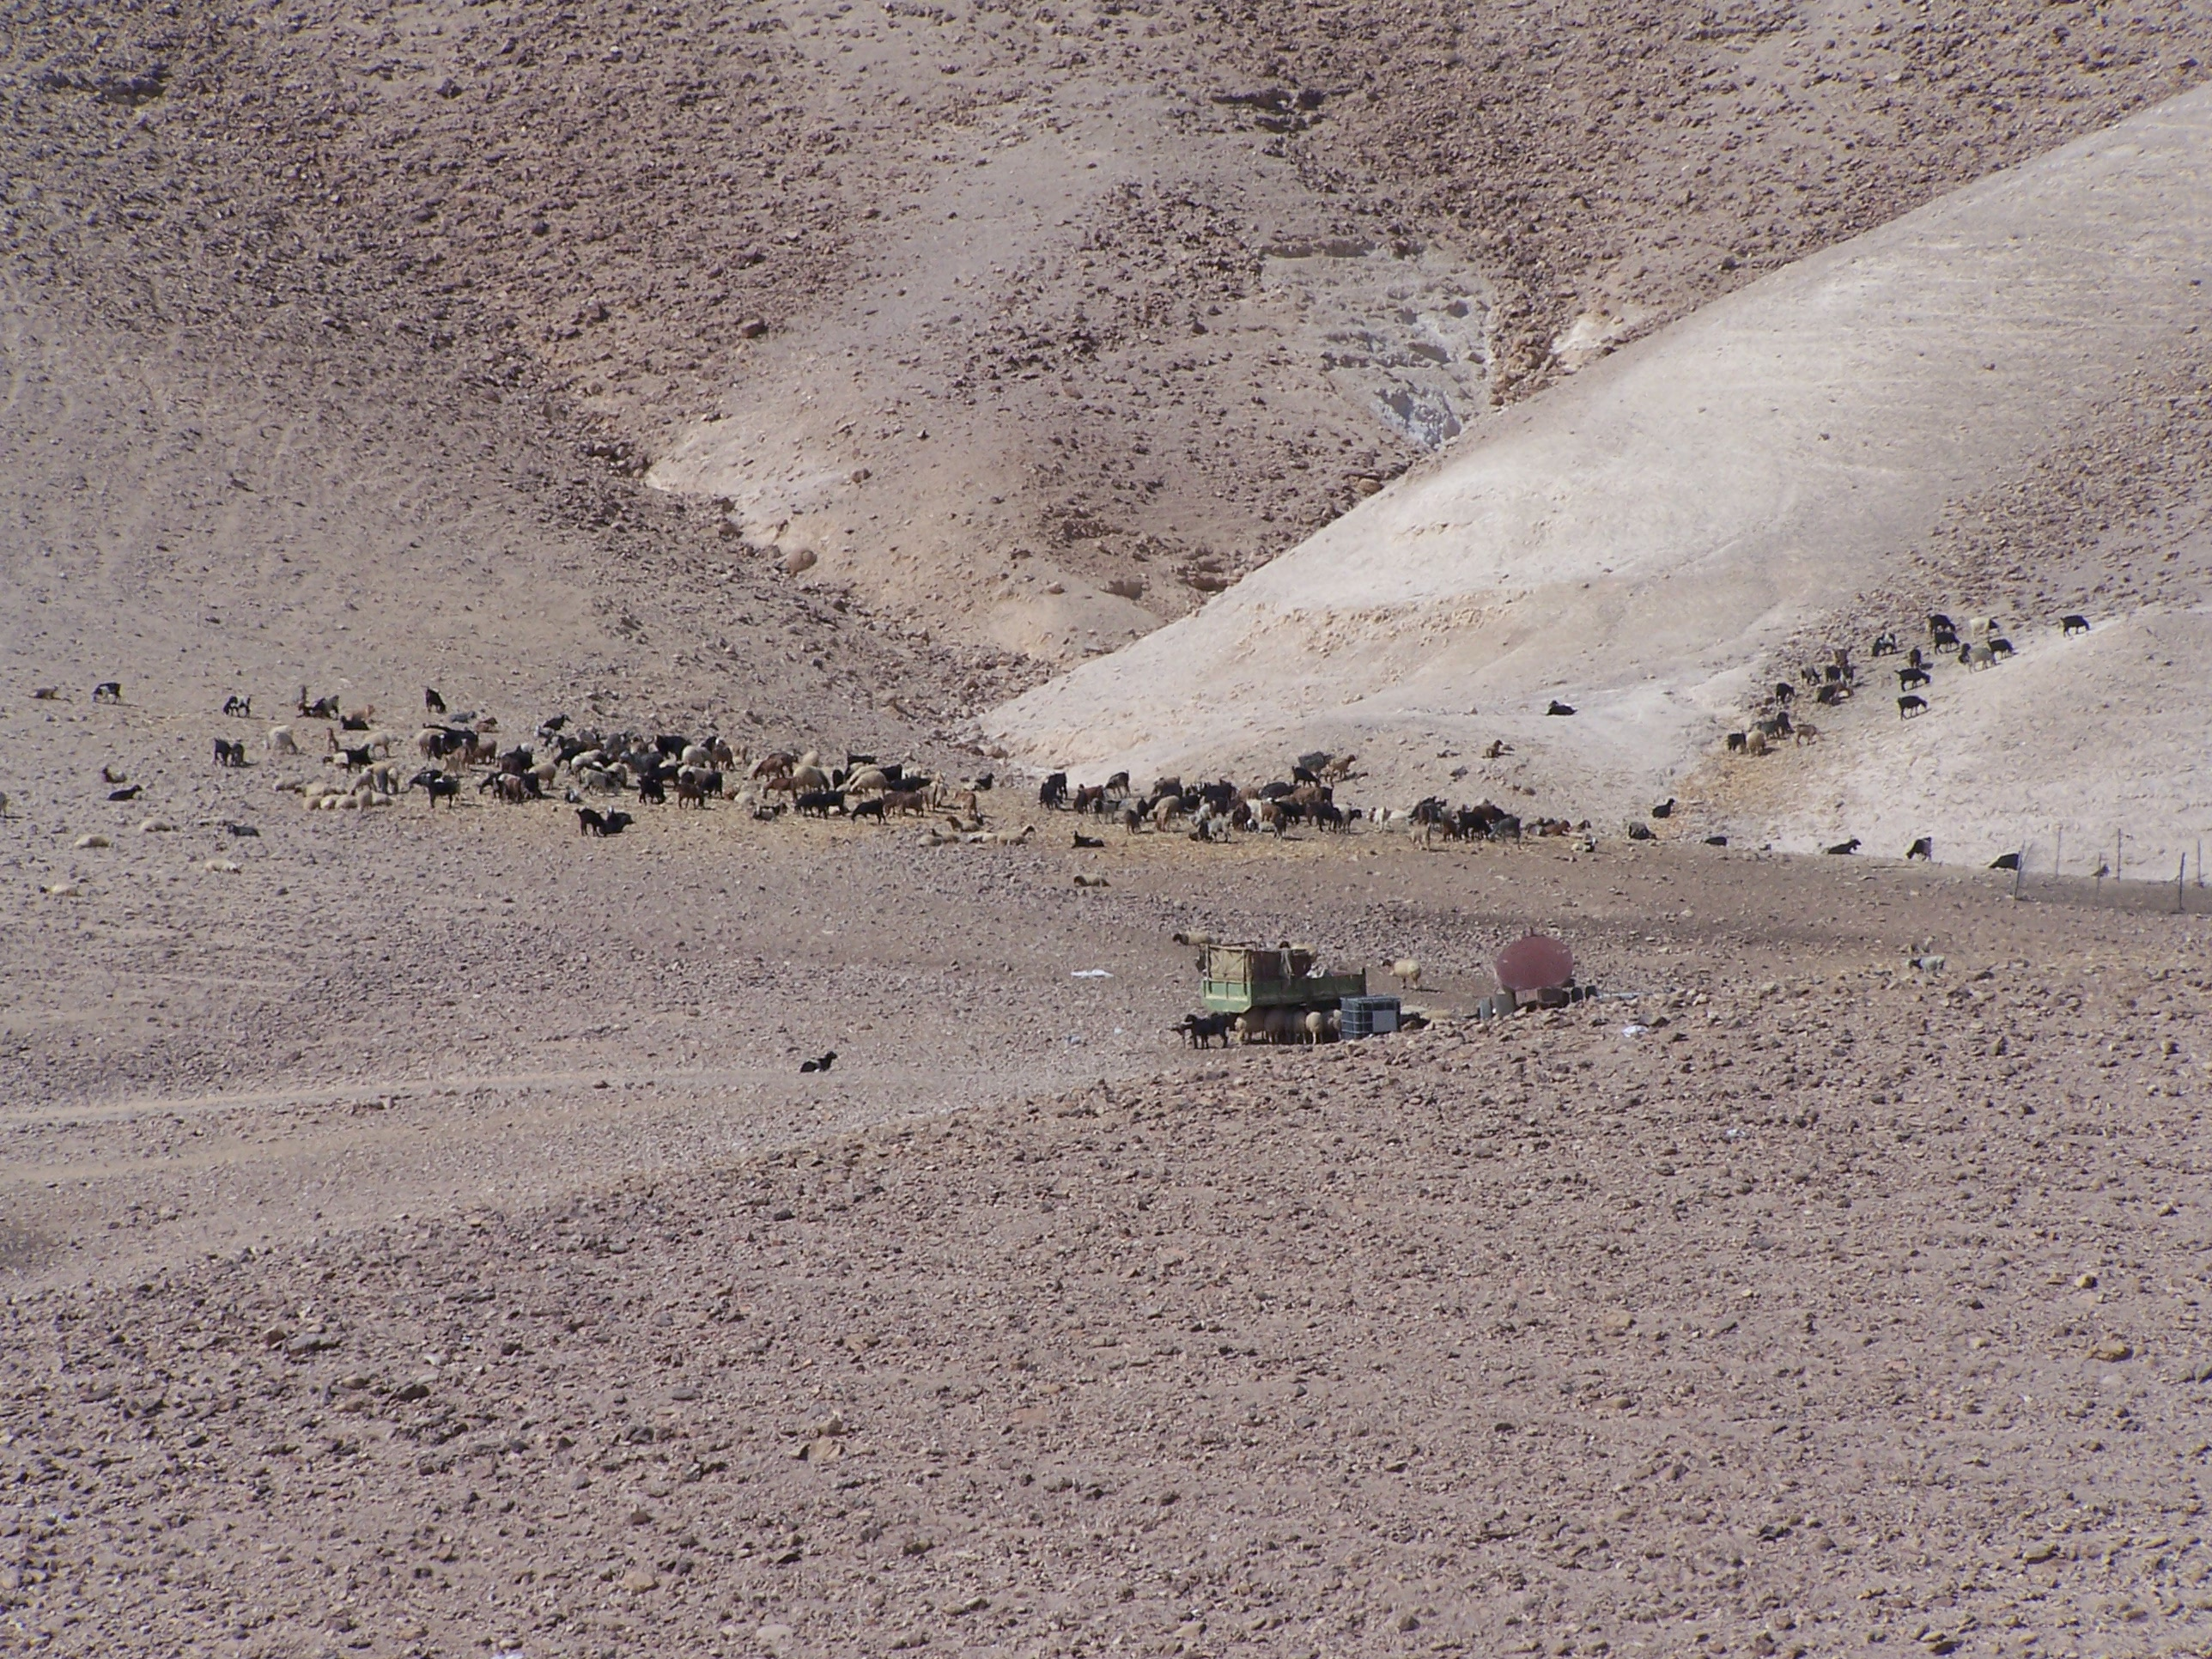 Sheep and goats graze in the parched Judean desert.